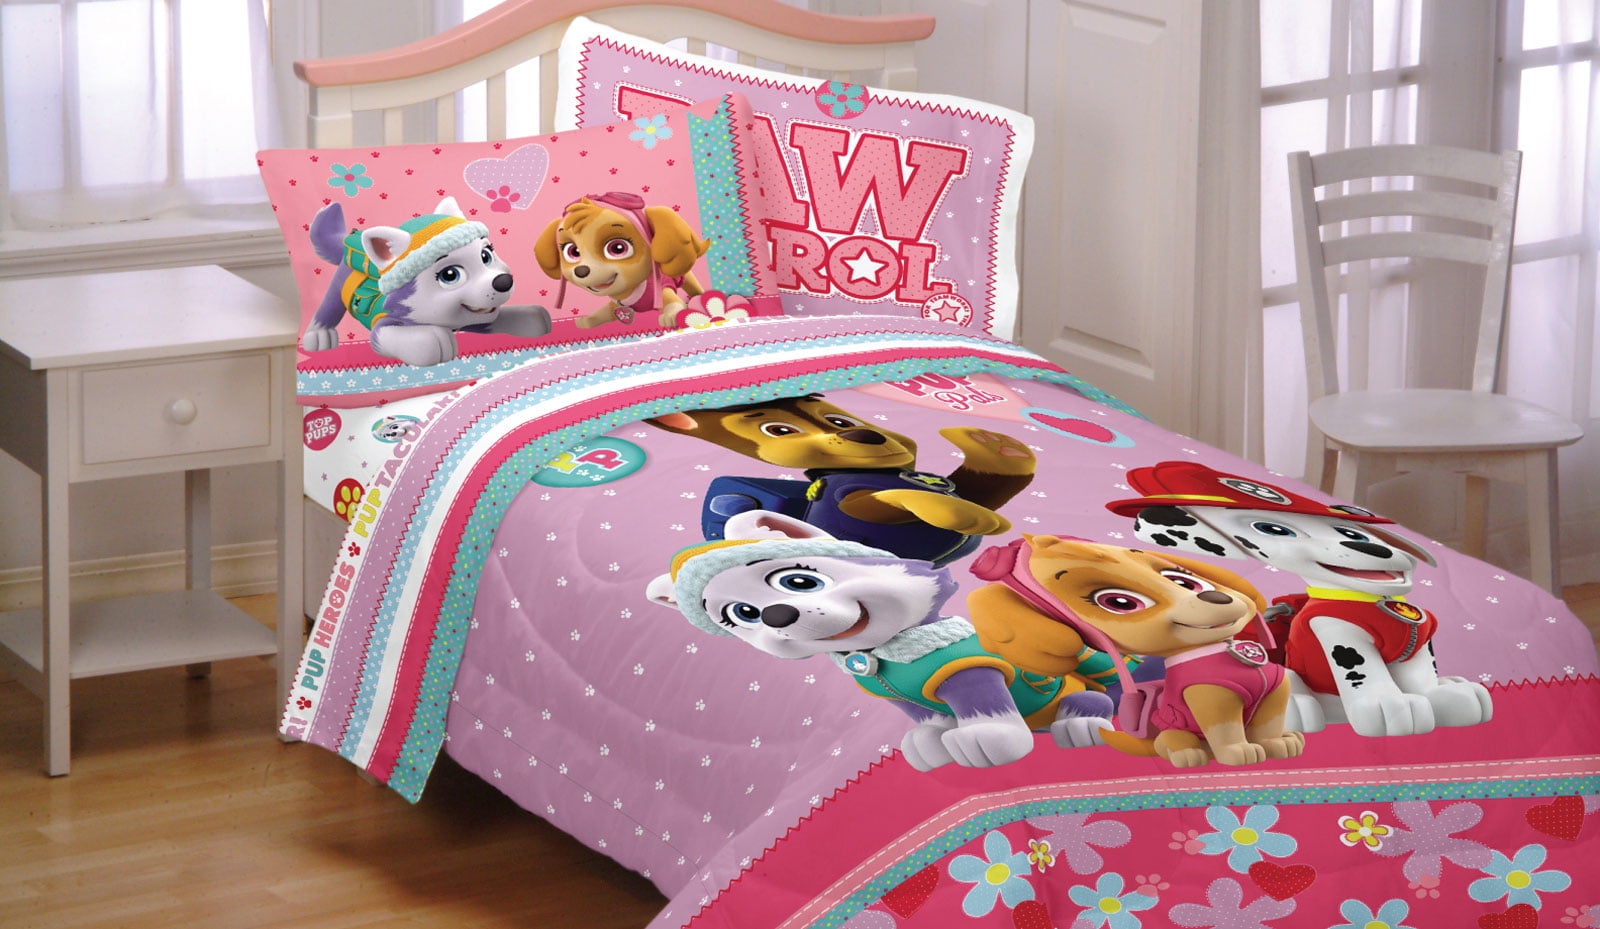 paw patrol twin bed in a bag